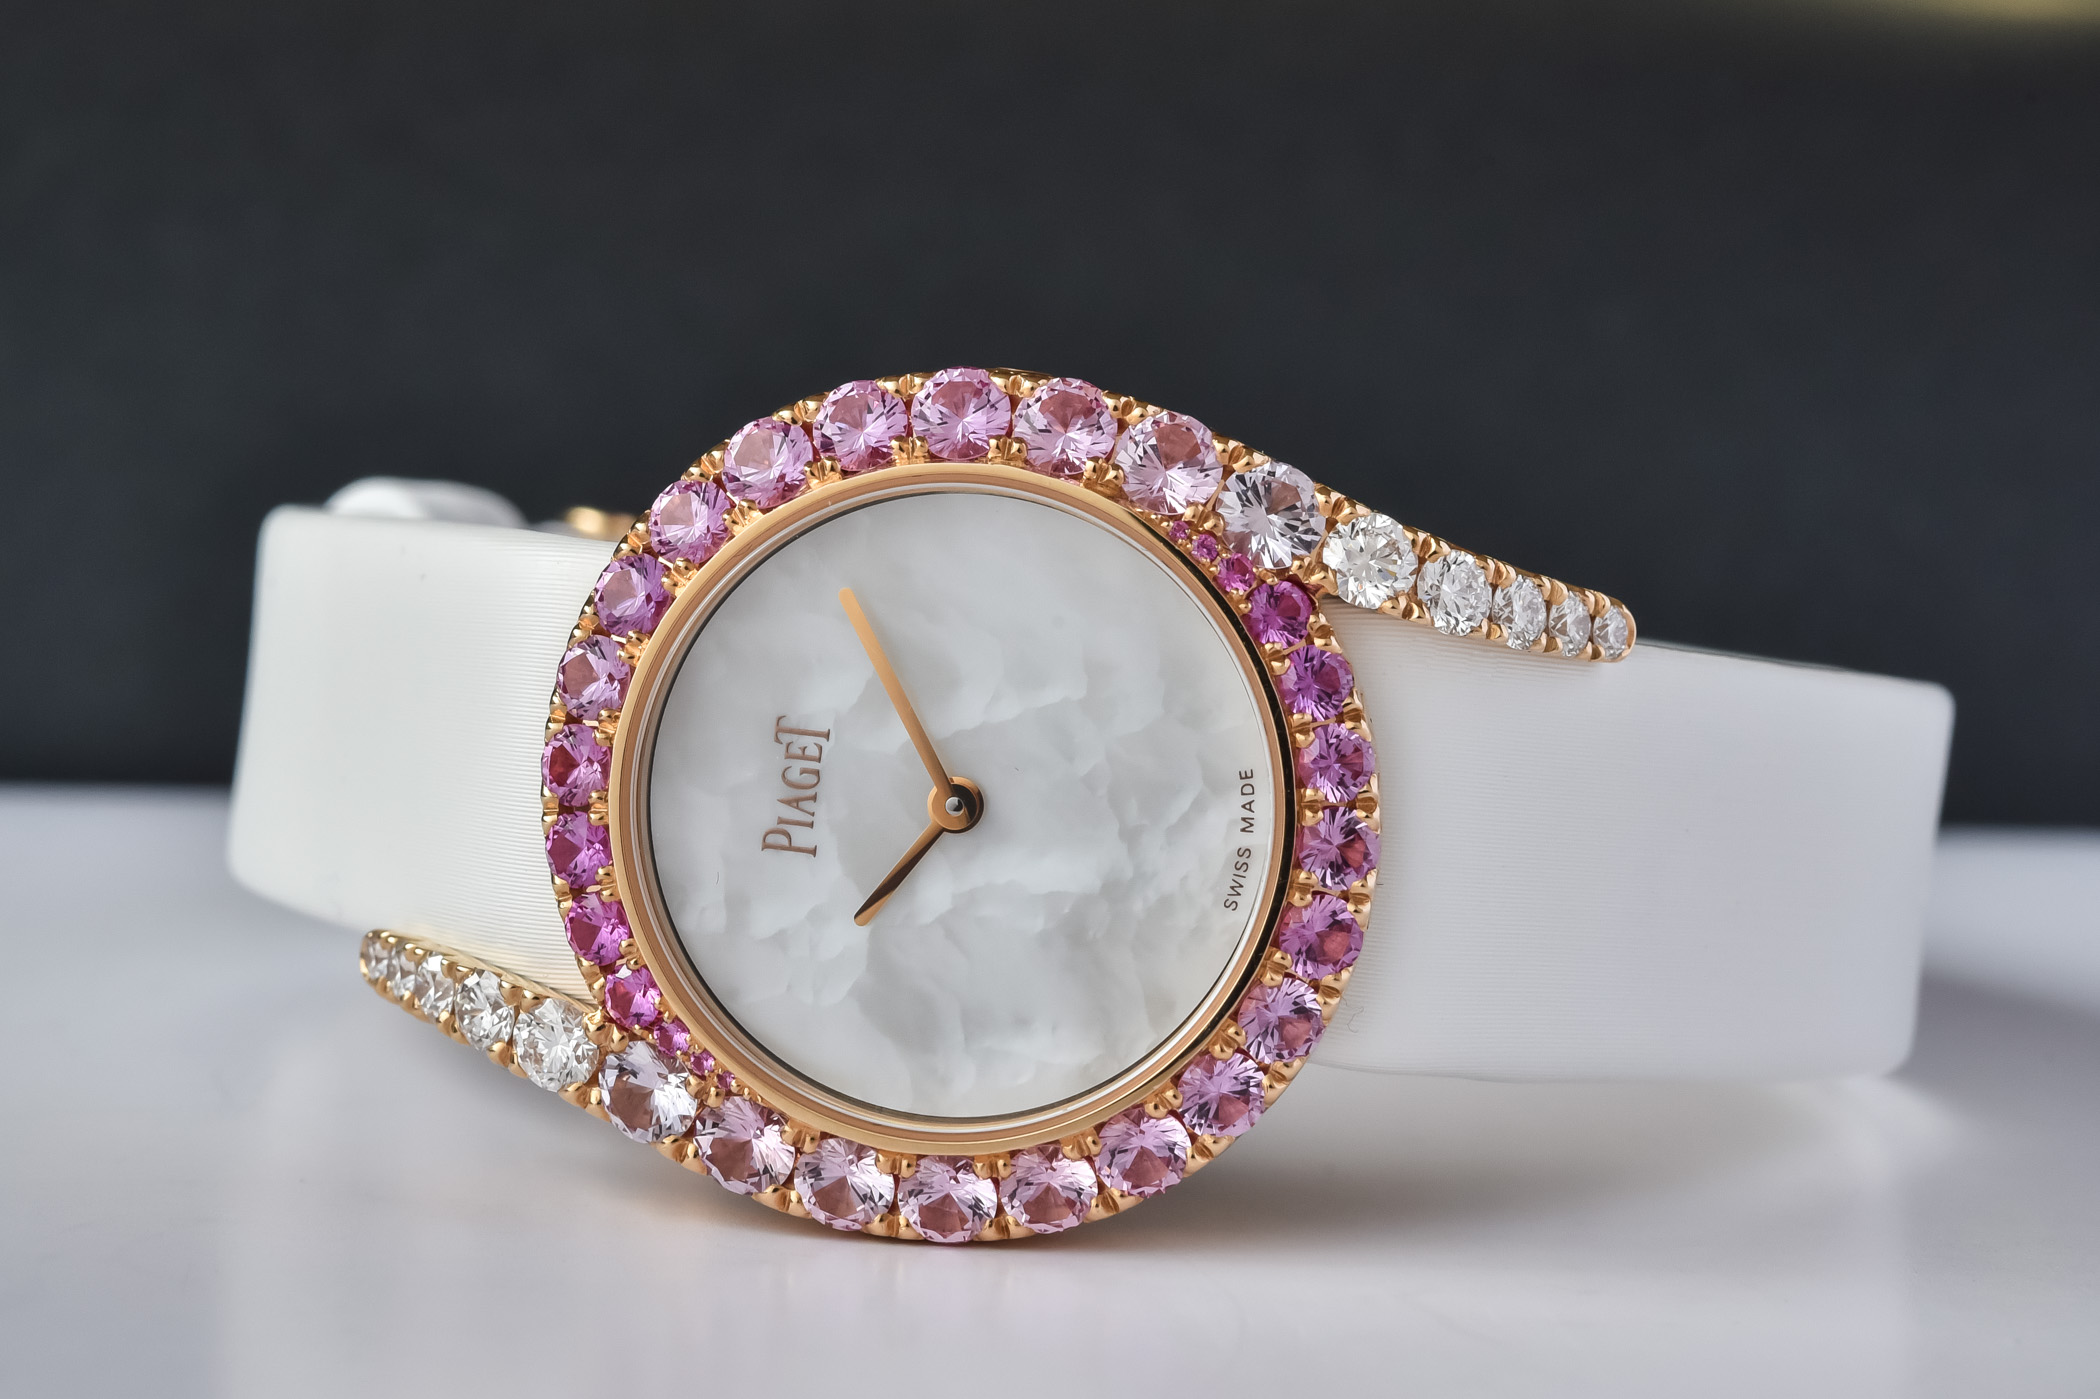 2021 Piaget Limelight Gala Collection - 1